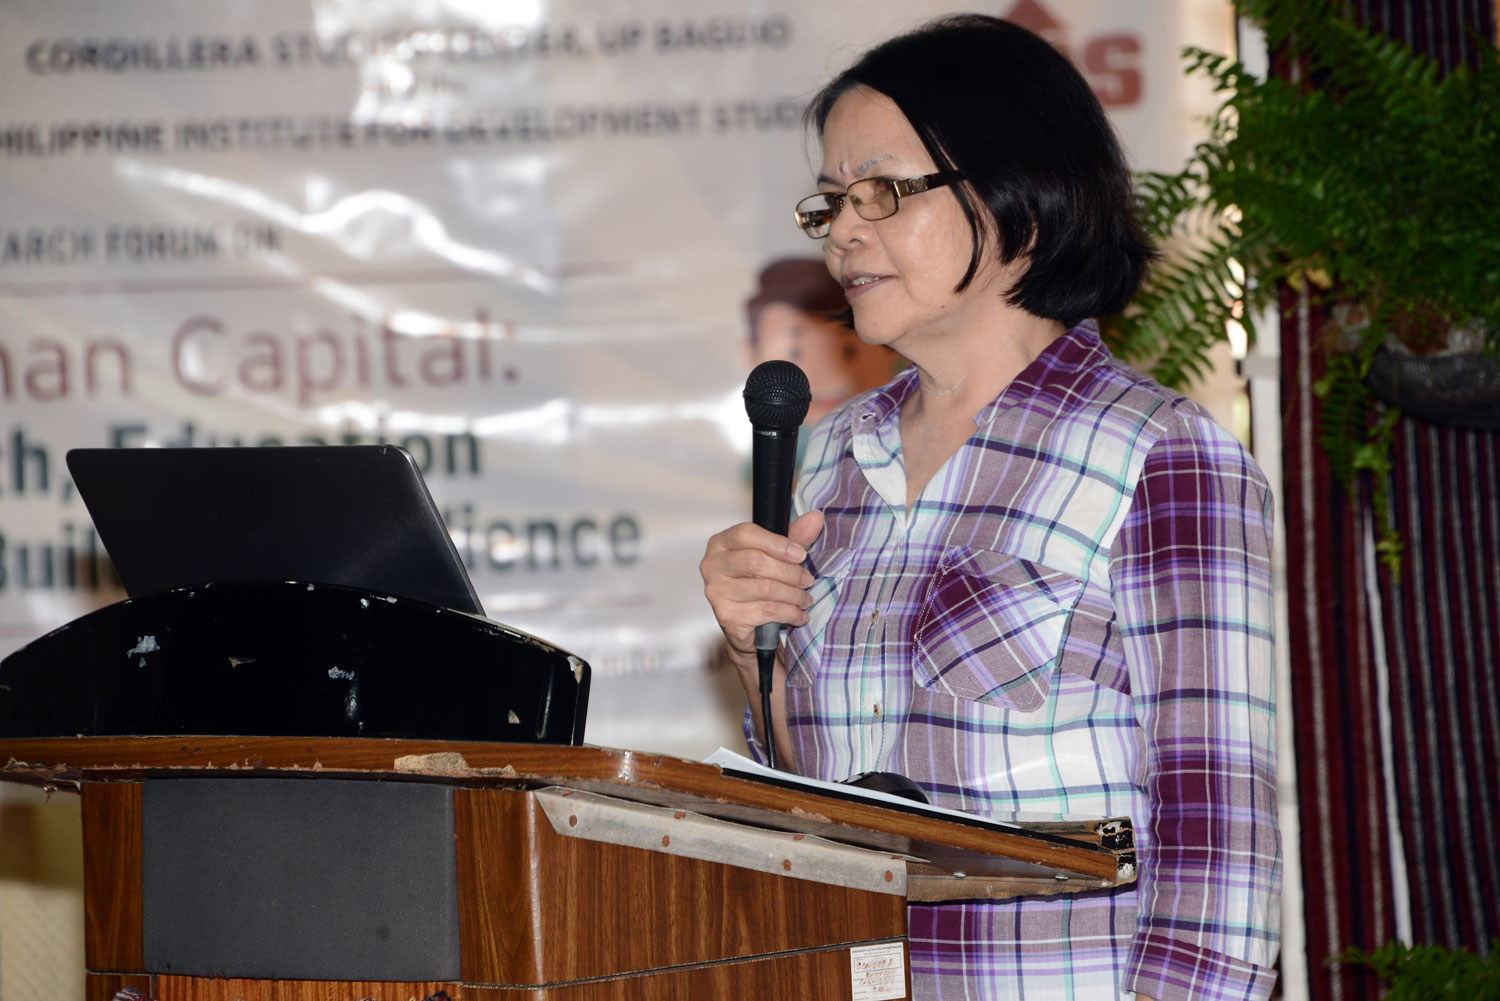 Policy Research Forum on Human Capital: Health, Education, and Building Resilience-DSC_6116.jpg